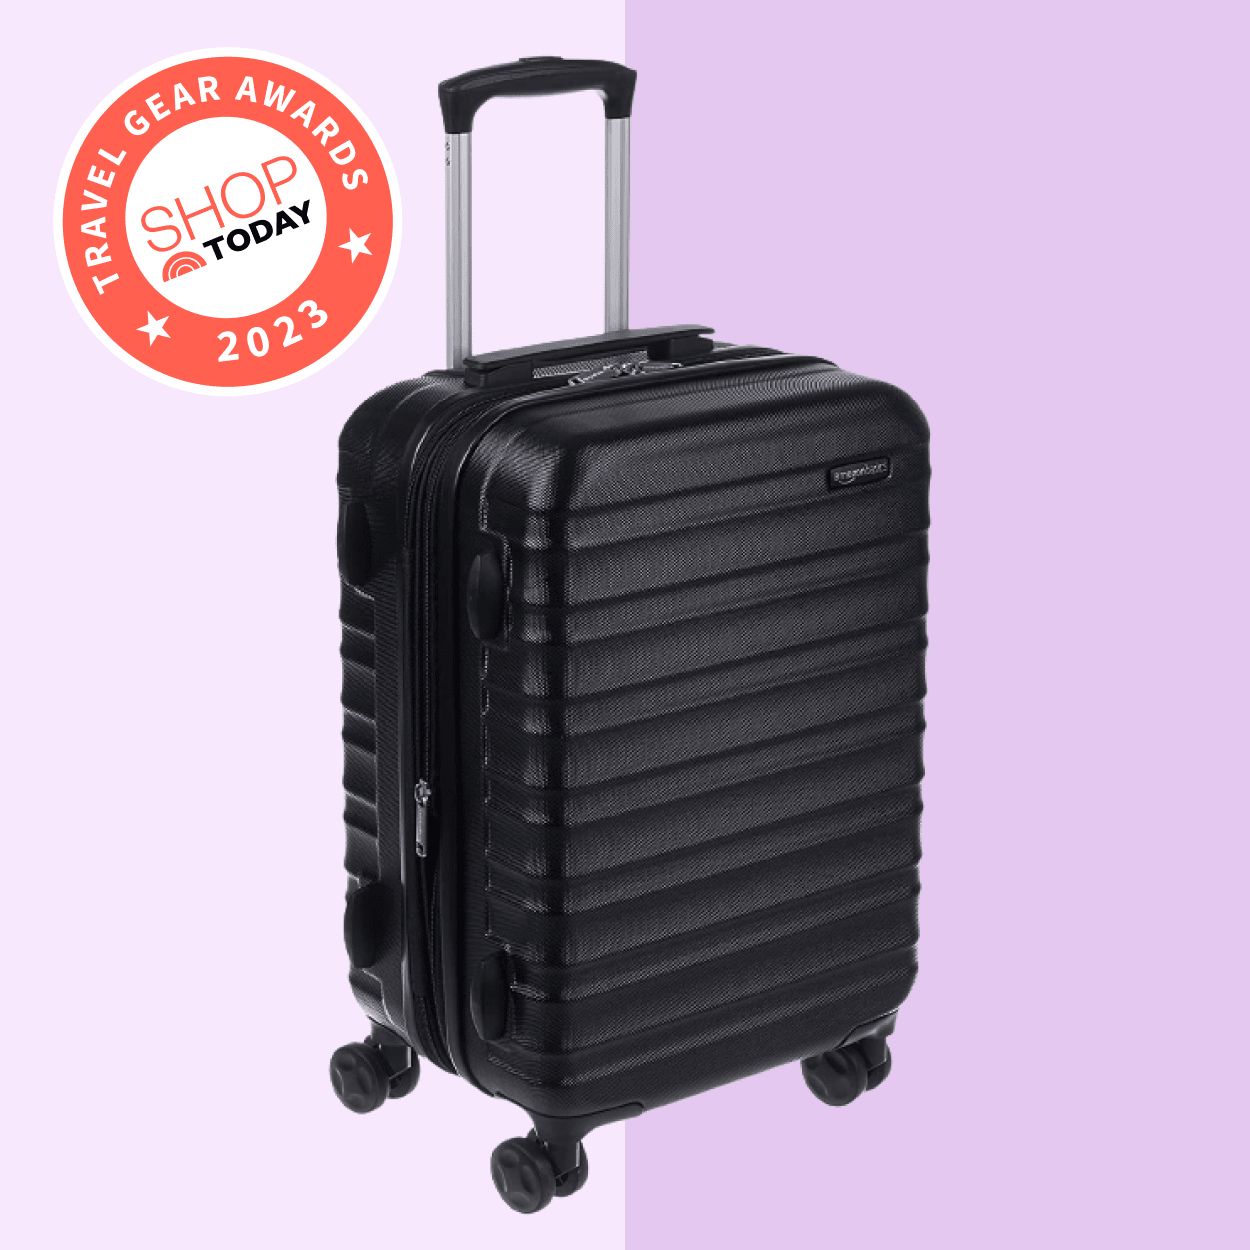 6 best suitcases, duffles of 2023: Shop TODAY Travel Gear Awards